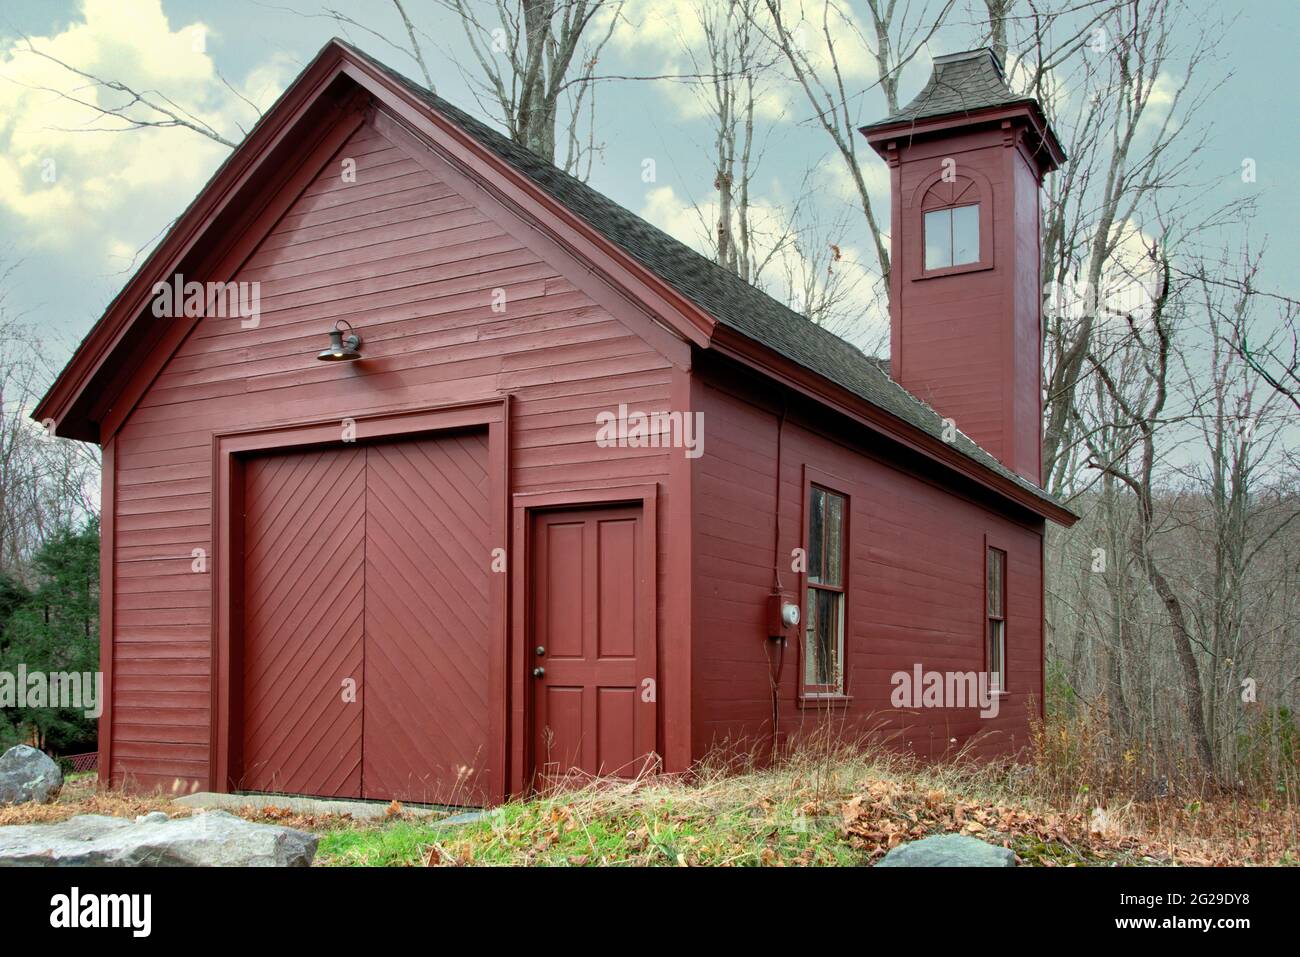 Old red fire station with tower used for drying hoses. Built in 1870, this  wood frame building is listed in the National Registry of Historic Places. Stock Photo